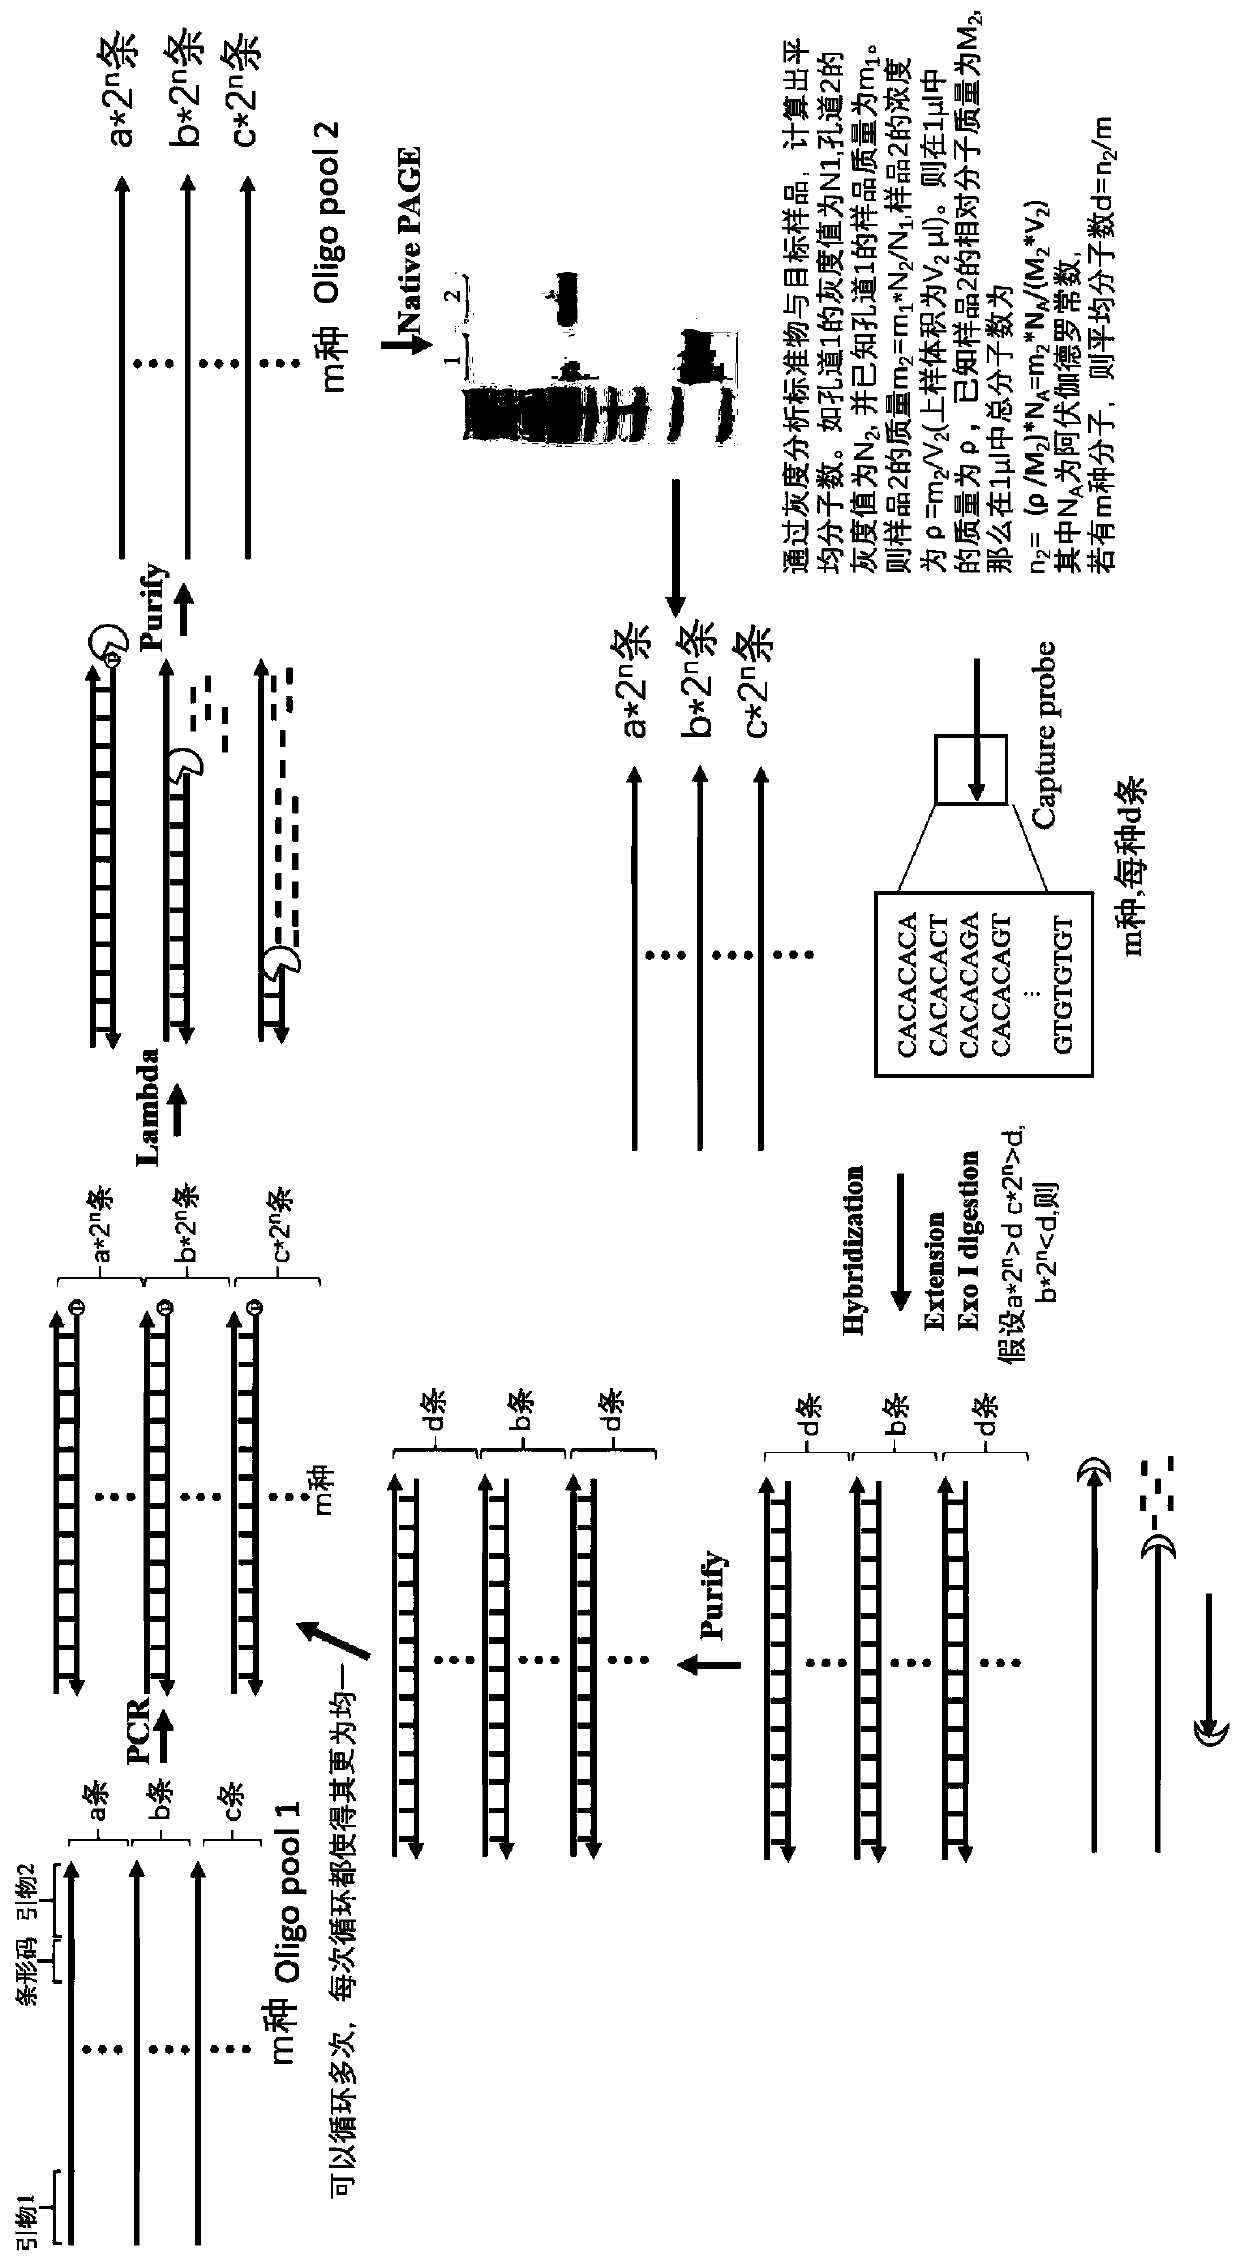 Isothermal oligonucleotide library amplification method applied to DNA data storage